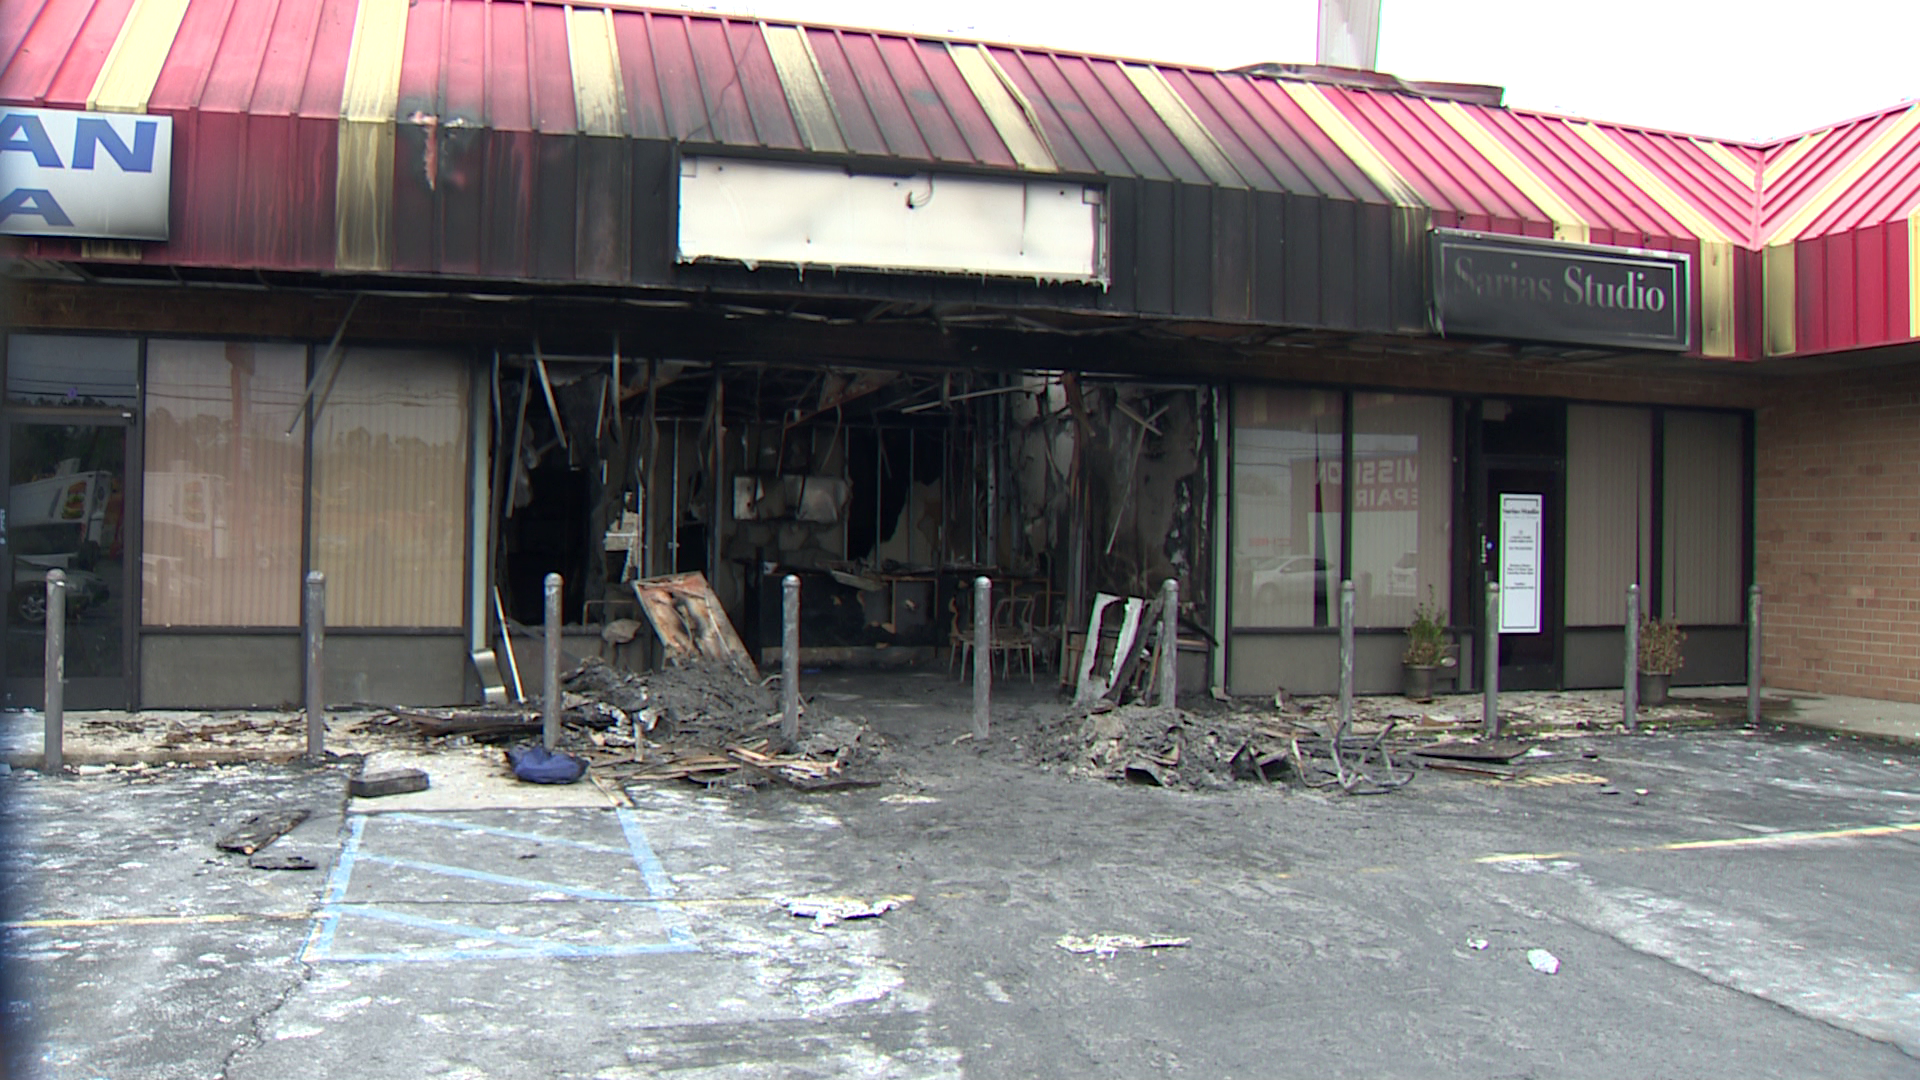 A late night fire at a strip mall in southeast Charlotte was intentionally set, according to Charlotte Fire Department.